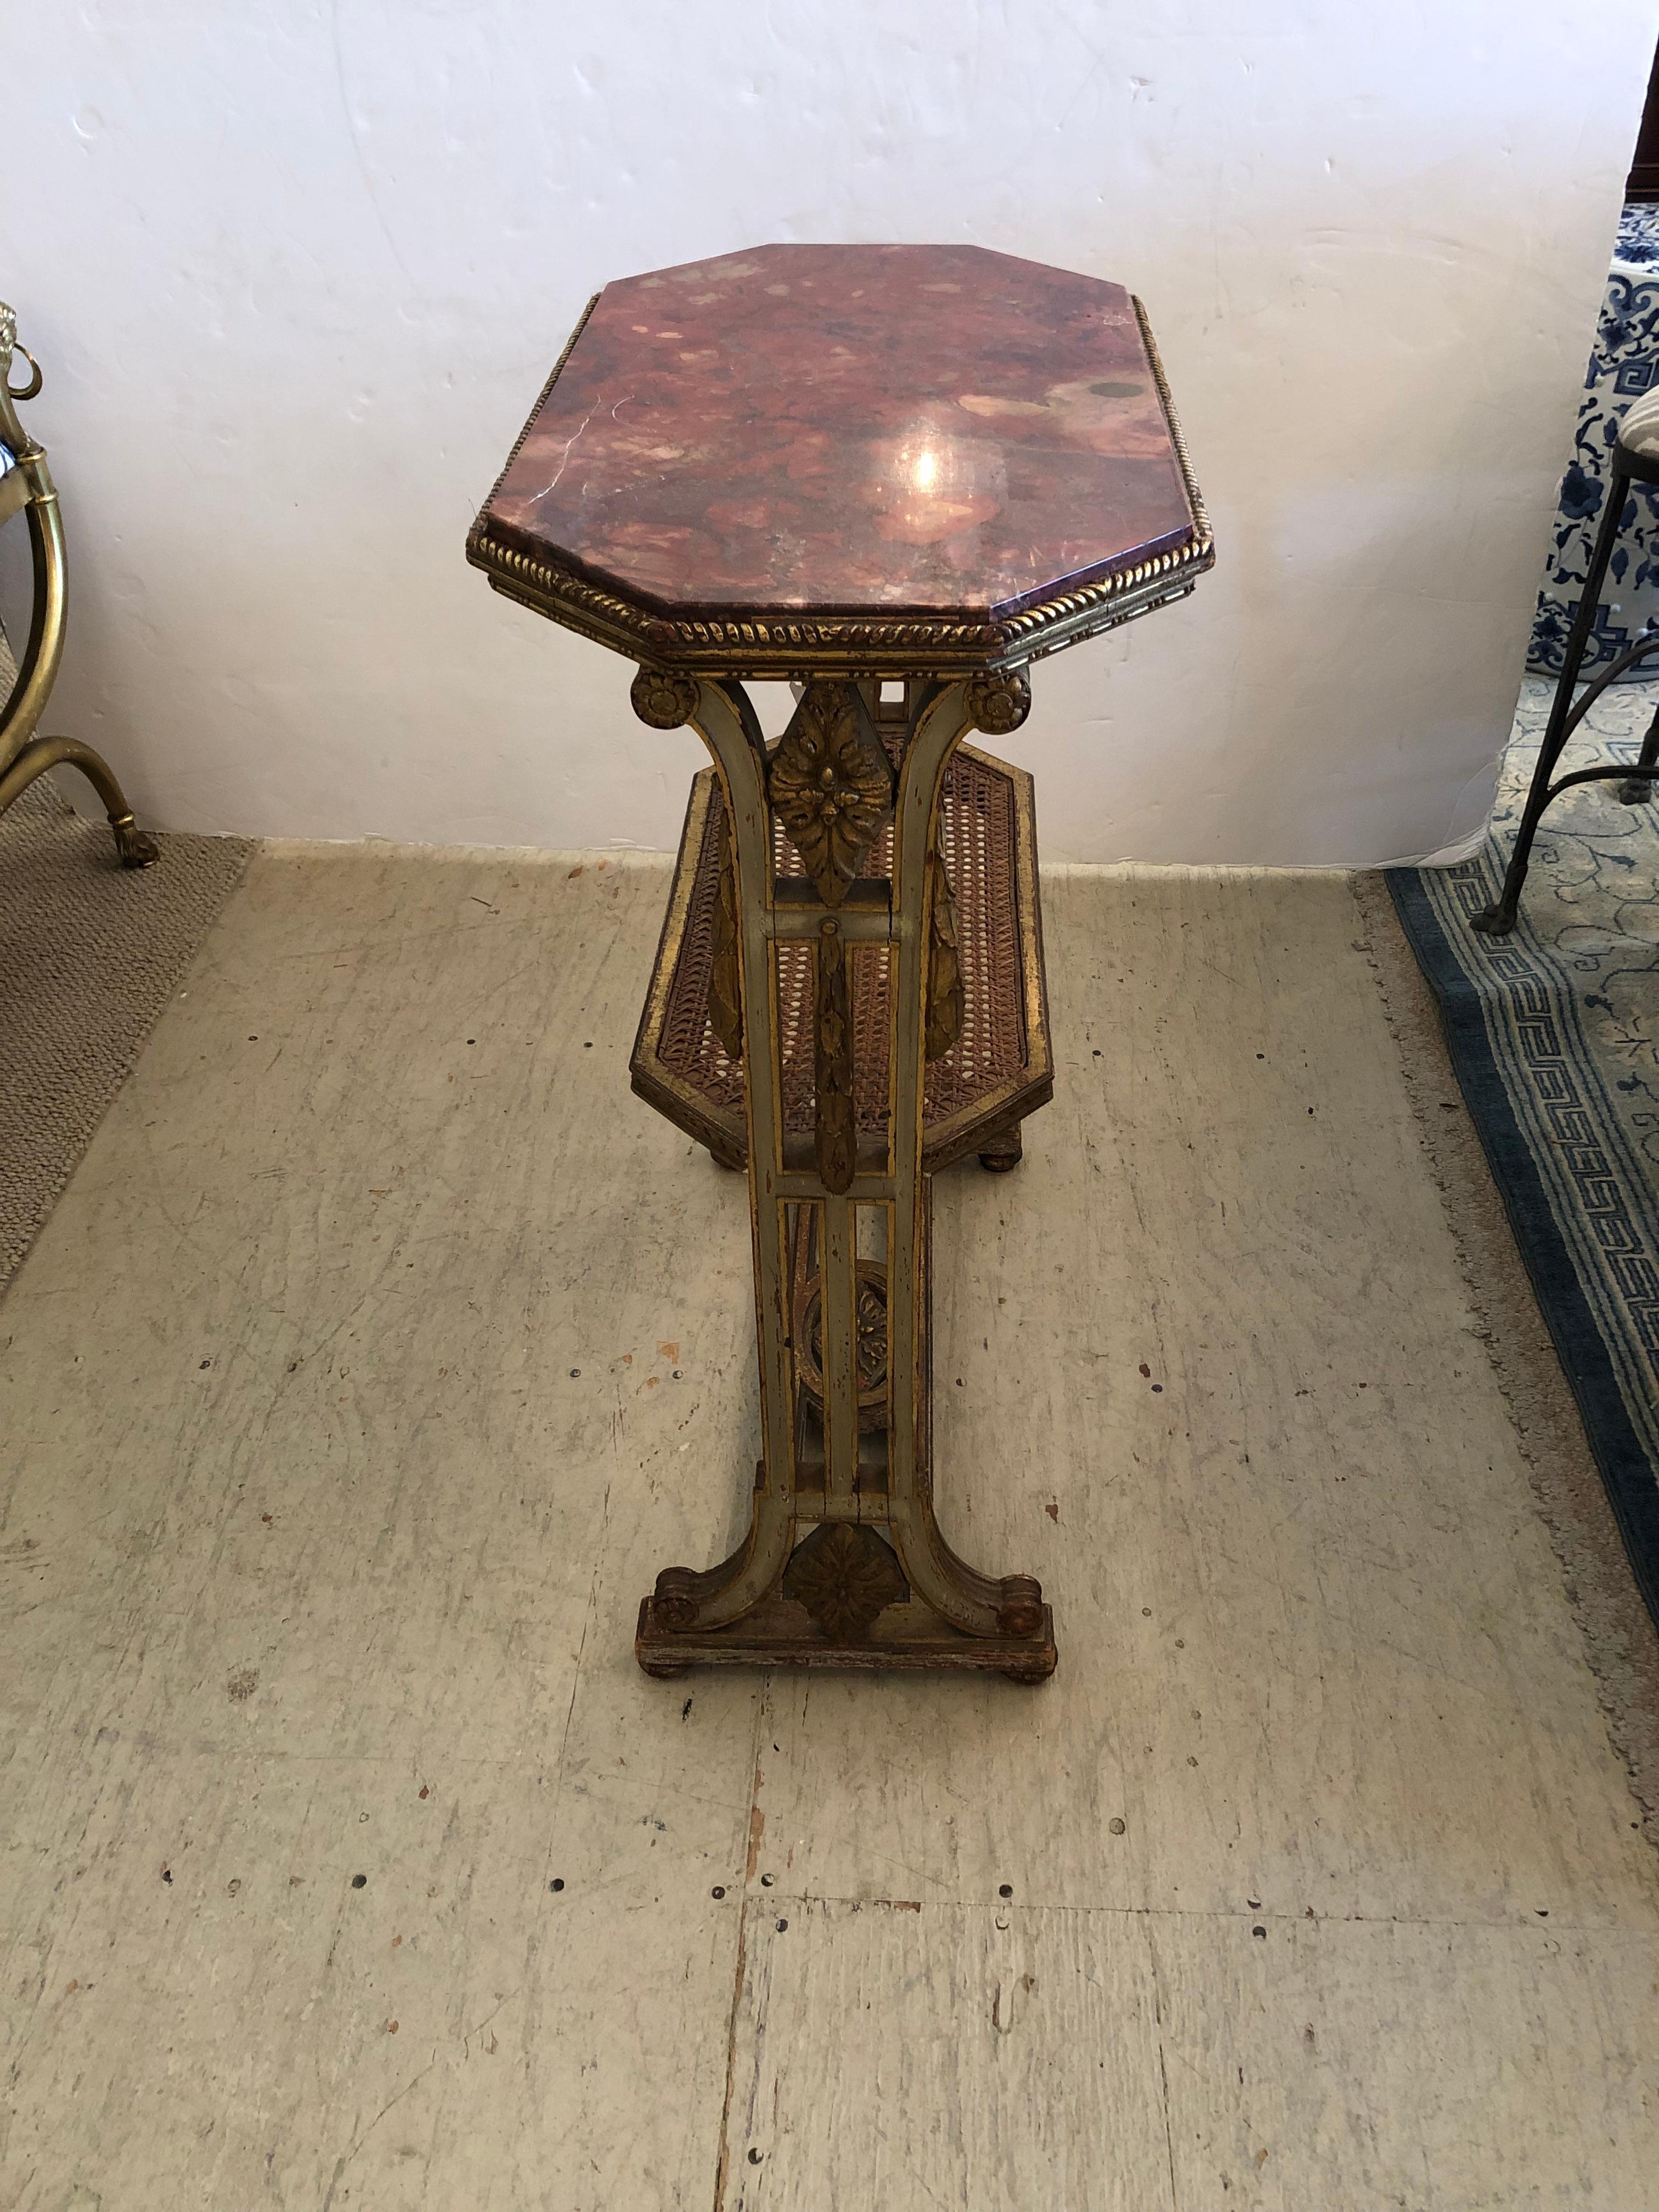 Unusually pretty rare shaped French Louis XVI style side table having octagonal marble top in a marvelous orangey rouge color palette on top of superb carved giltwood celadon/gray painted base with caned second lower tier.
Lower tier 17